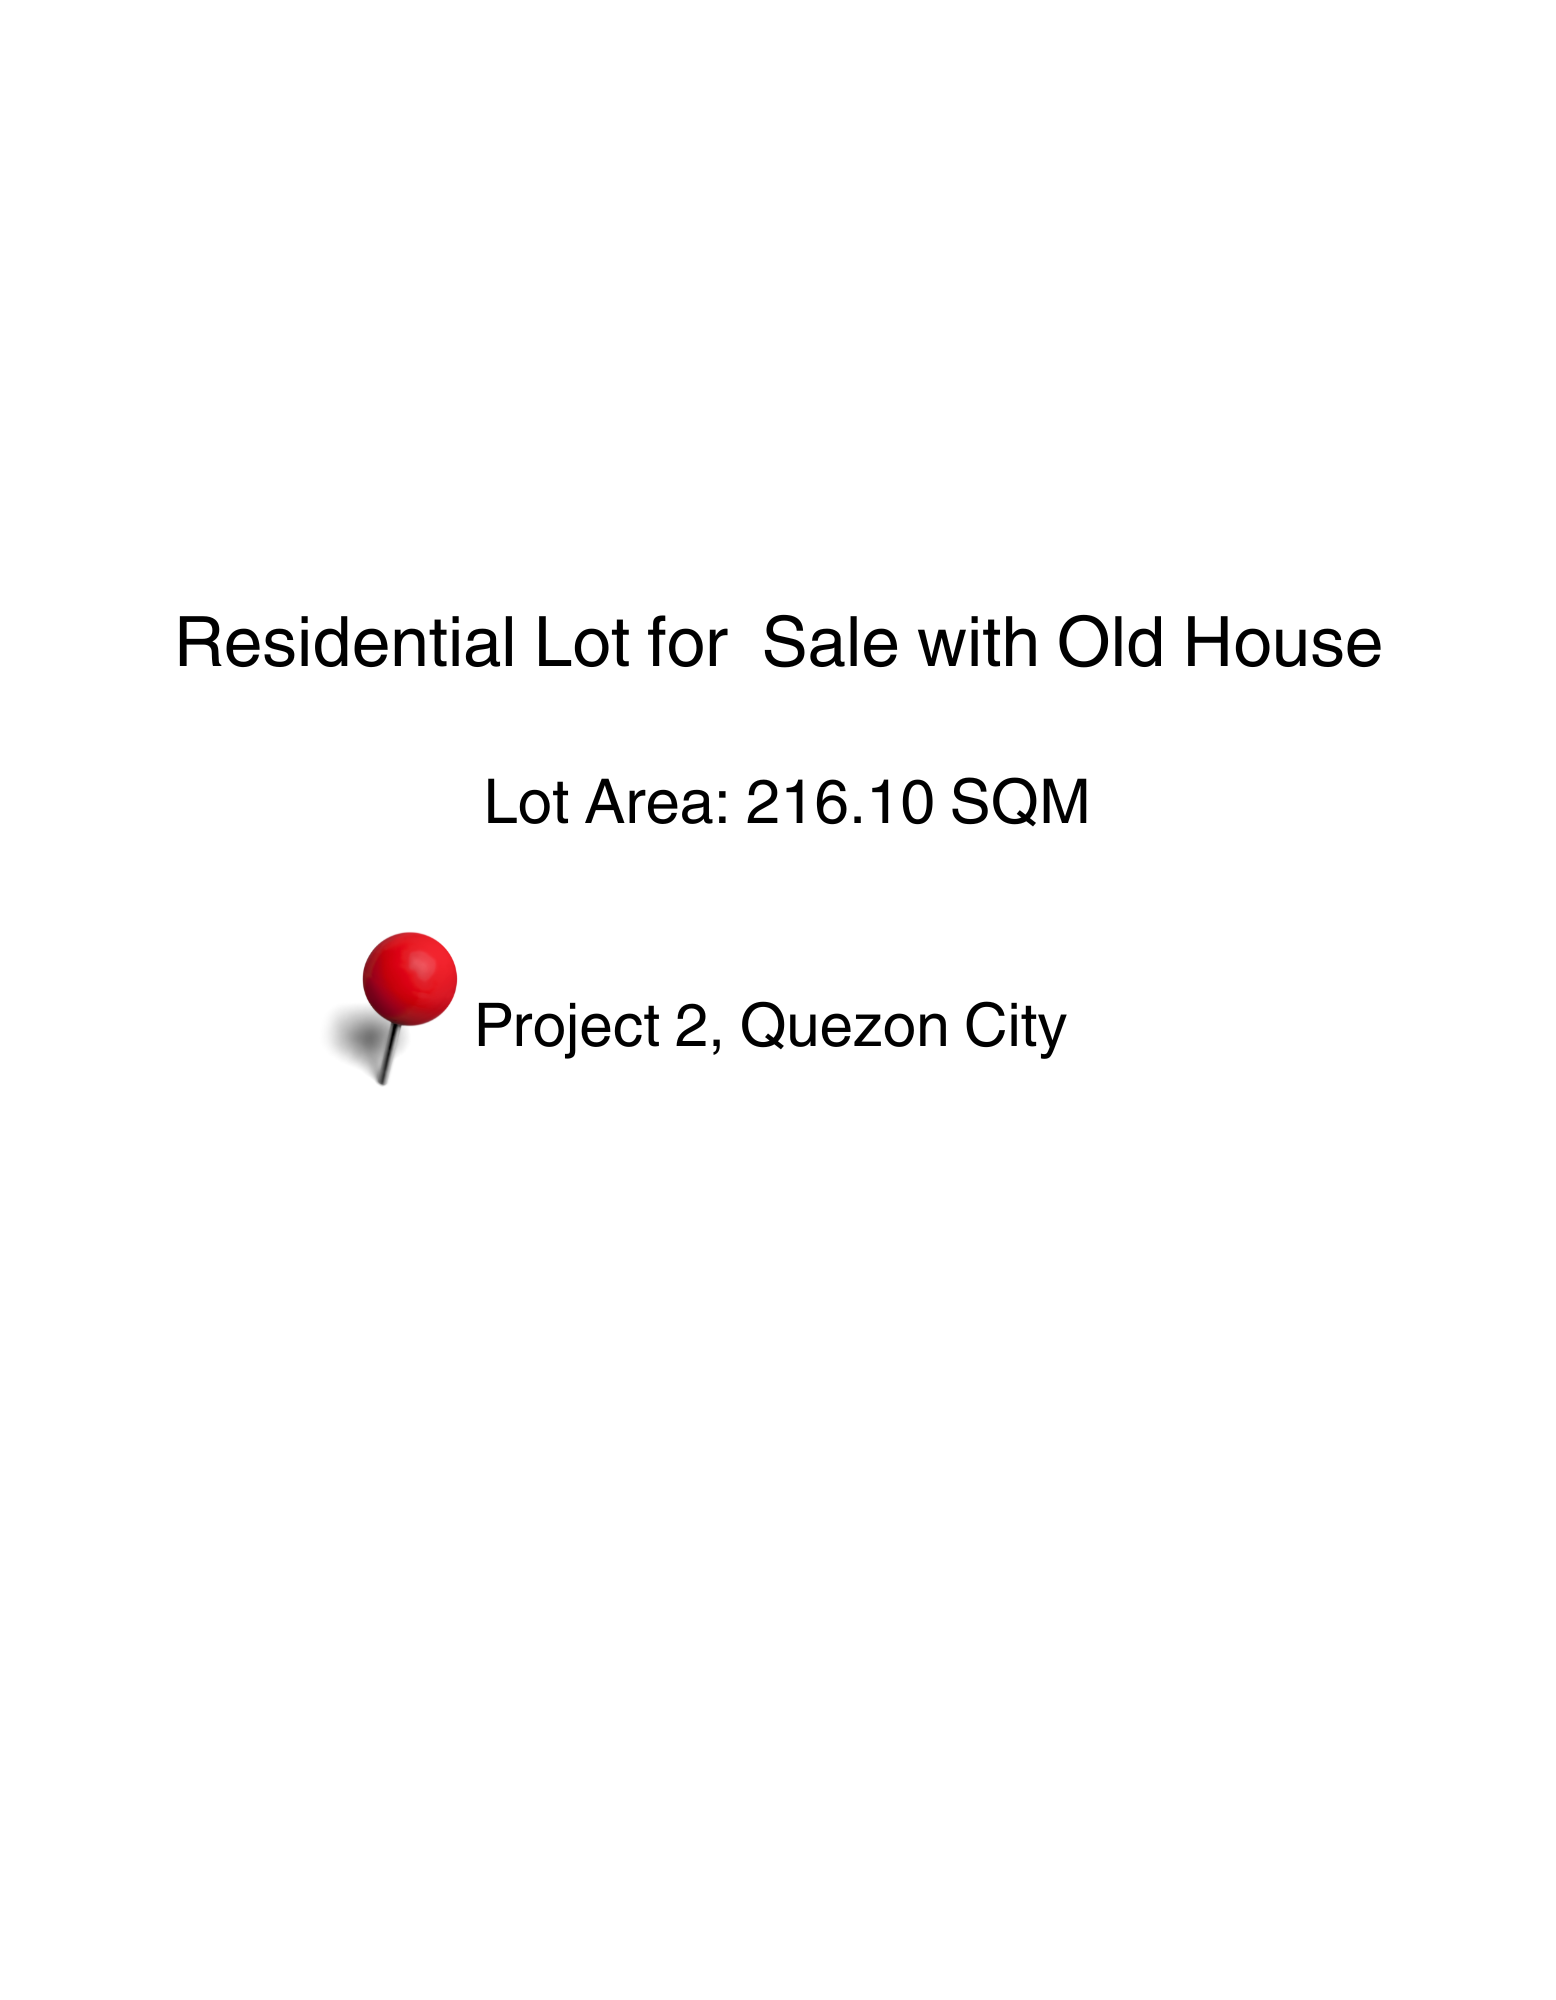 216.10SQMResidentialLotForSalewithOldHouseinProject2,QuezonCity-1.jpg